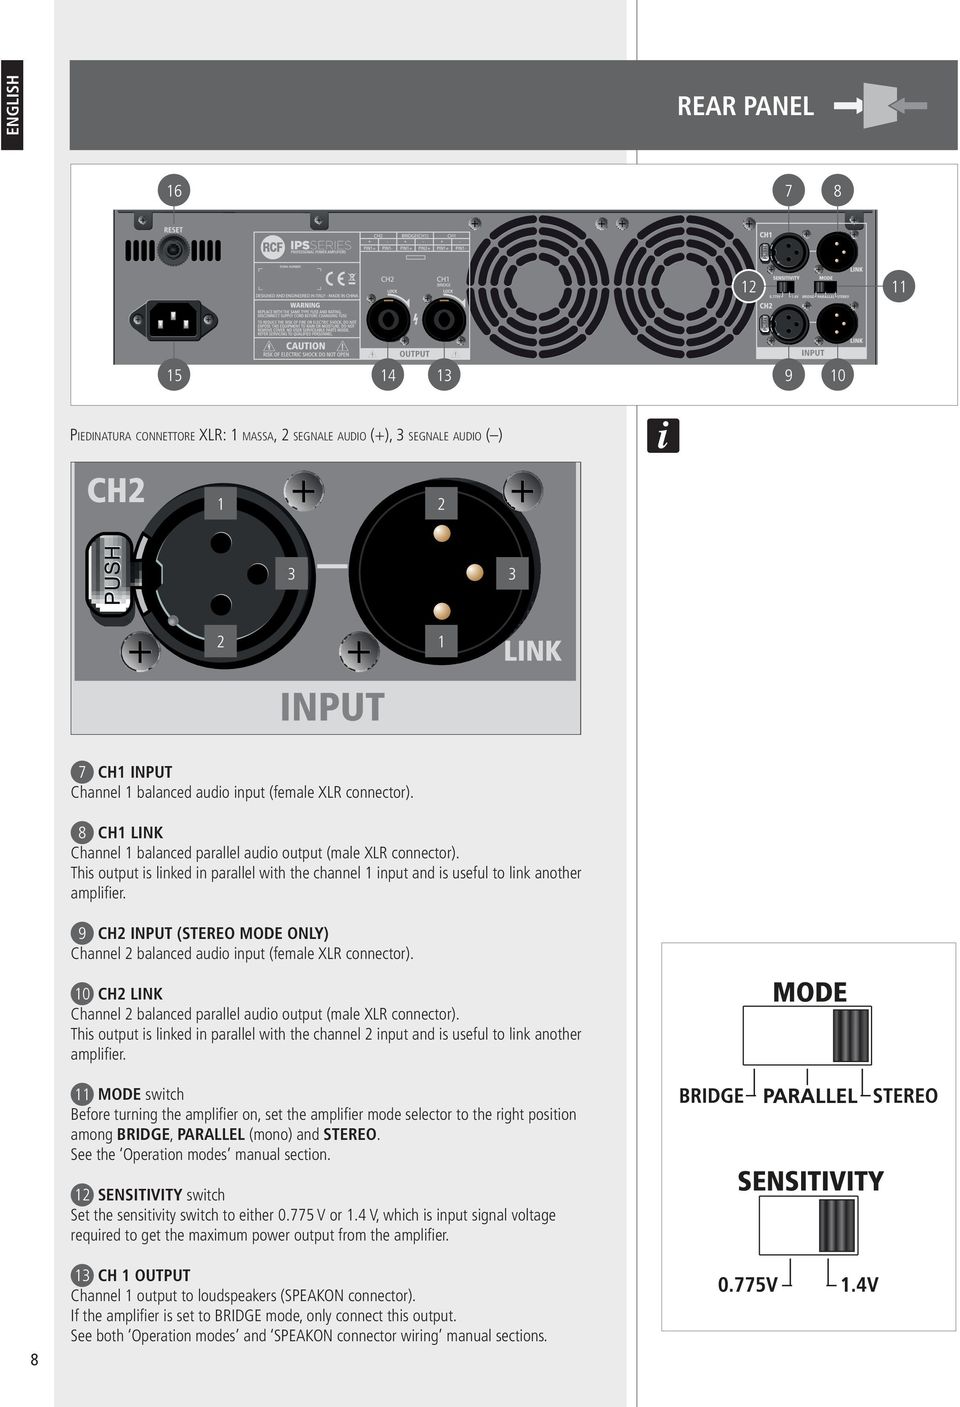 9 CH2 INPUT (STEREO MODE ONLY) Channel 2 balanced audio input (female XLR connector). 10 CH2 LINK Channel 2 balanced parallel audio output (male XLR connector).